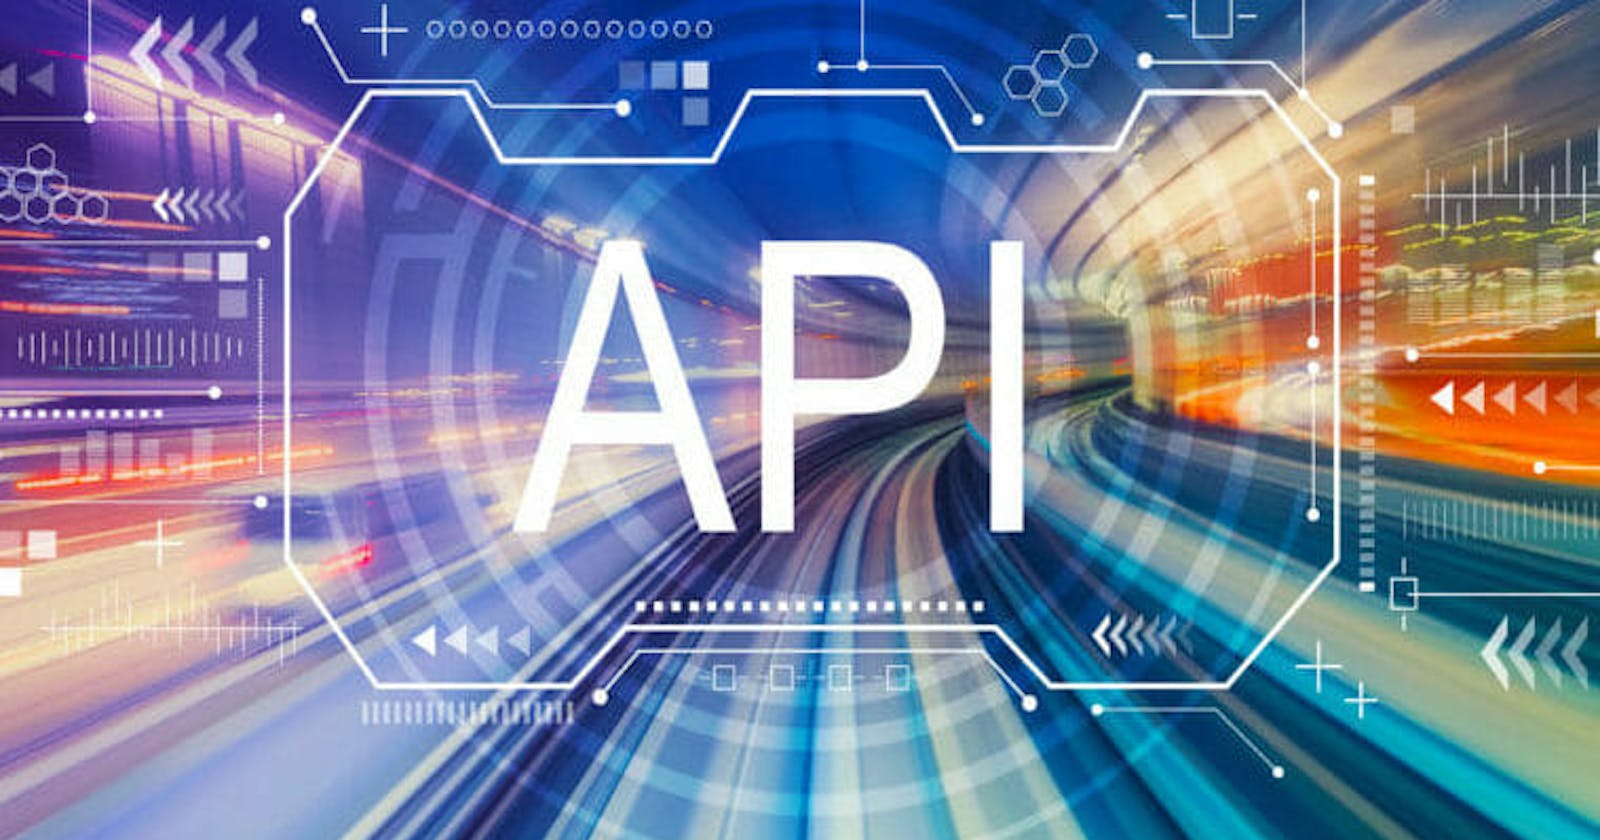 The basic concepts of APIs